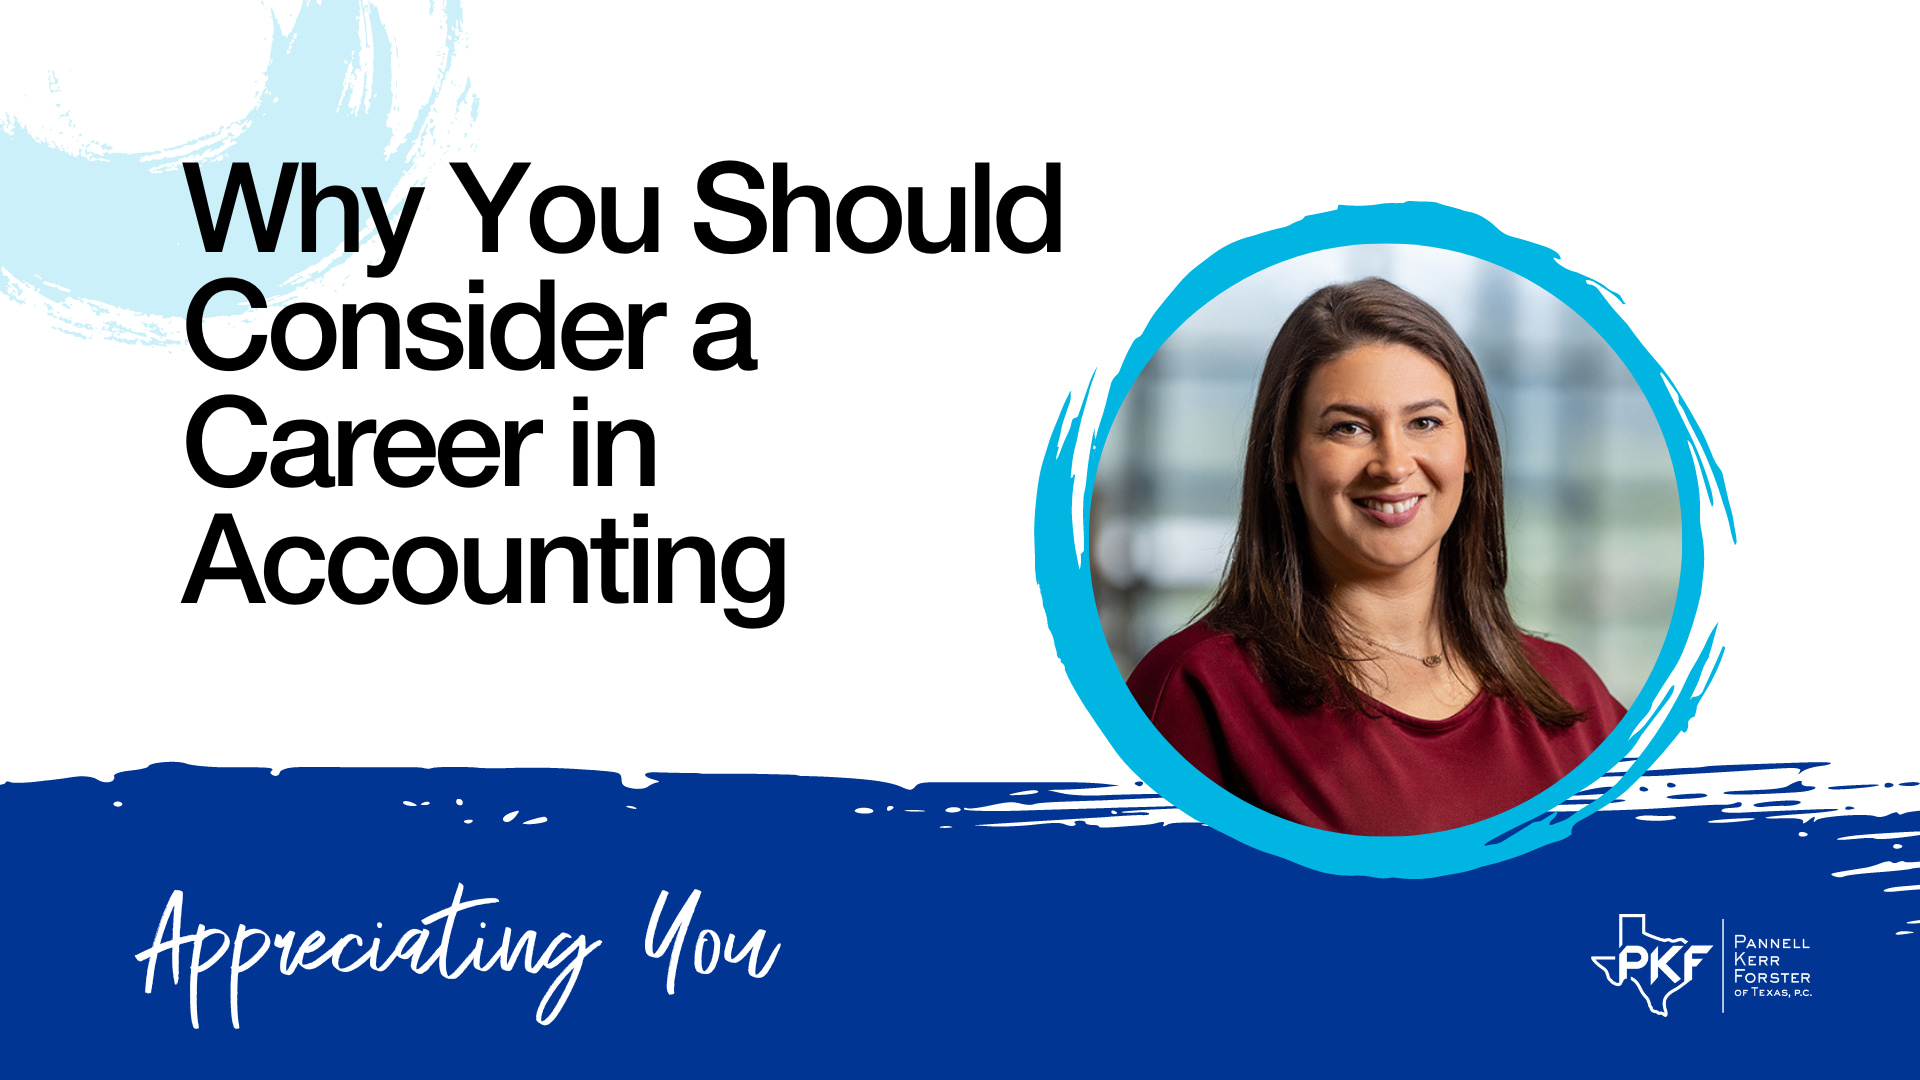 Video thumbnail image for "Why You Should Consider a Career in Accounting."